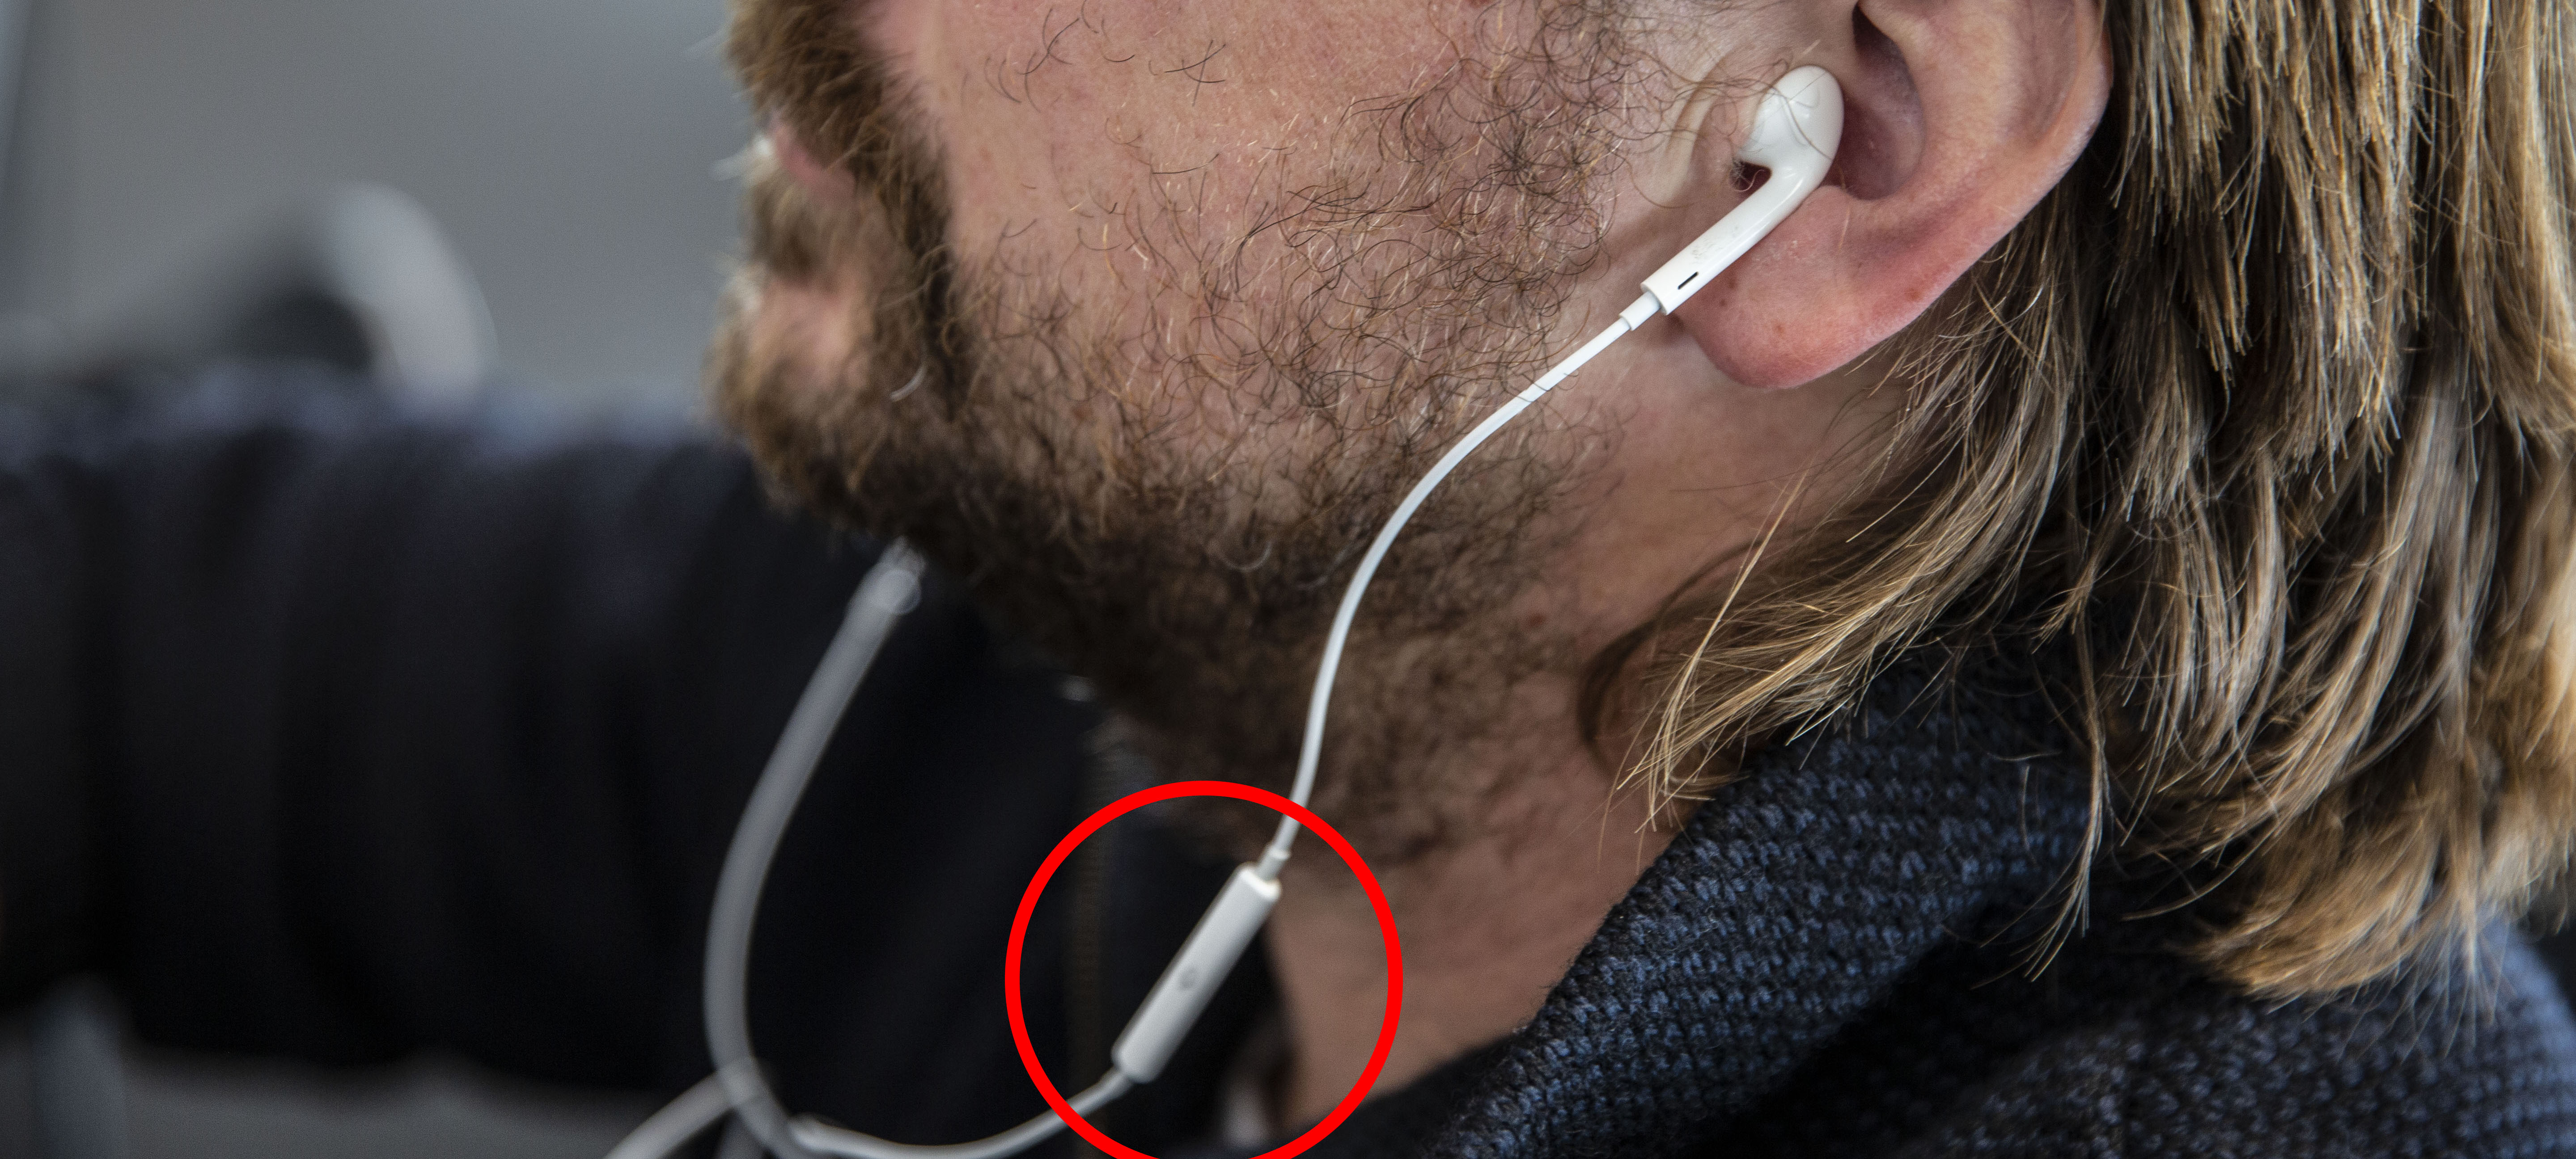 By using a headset with a microphone (the red circle), the noise from your surroundings is reduced and the viewers are able to hear you more clearly.